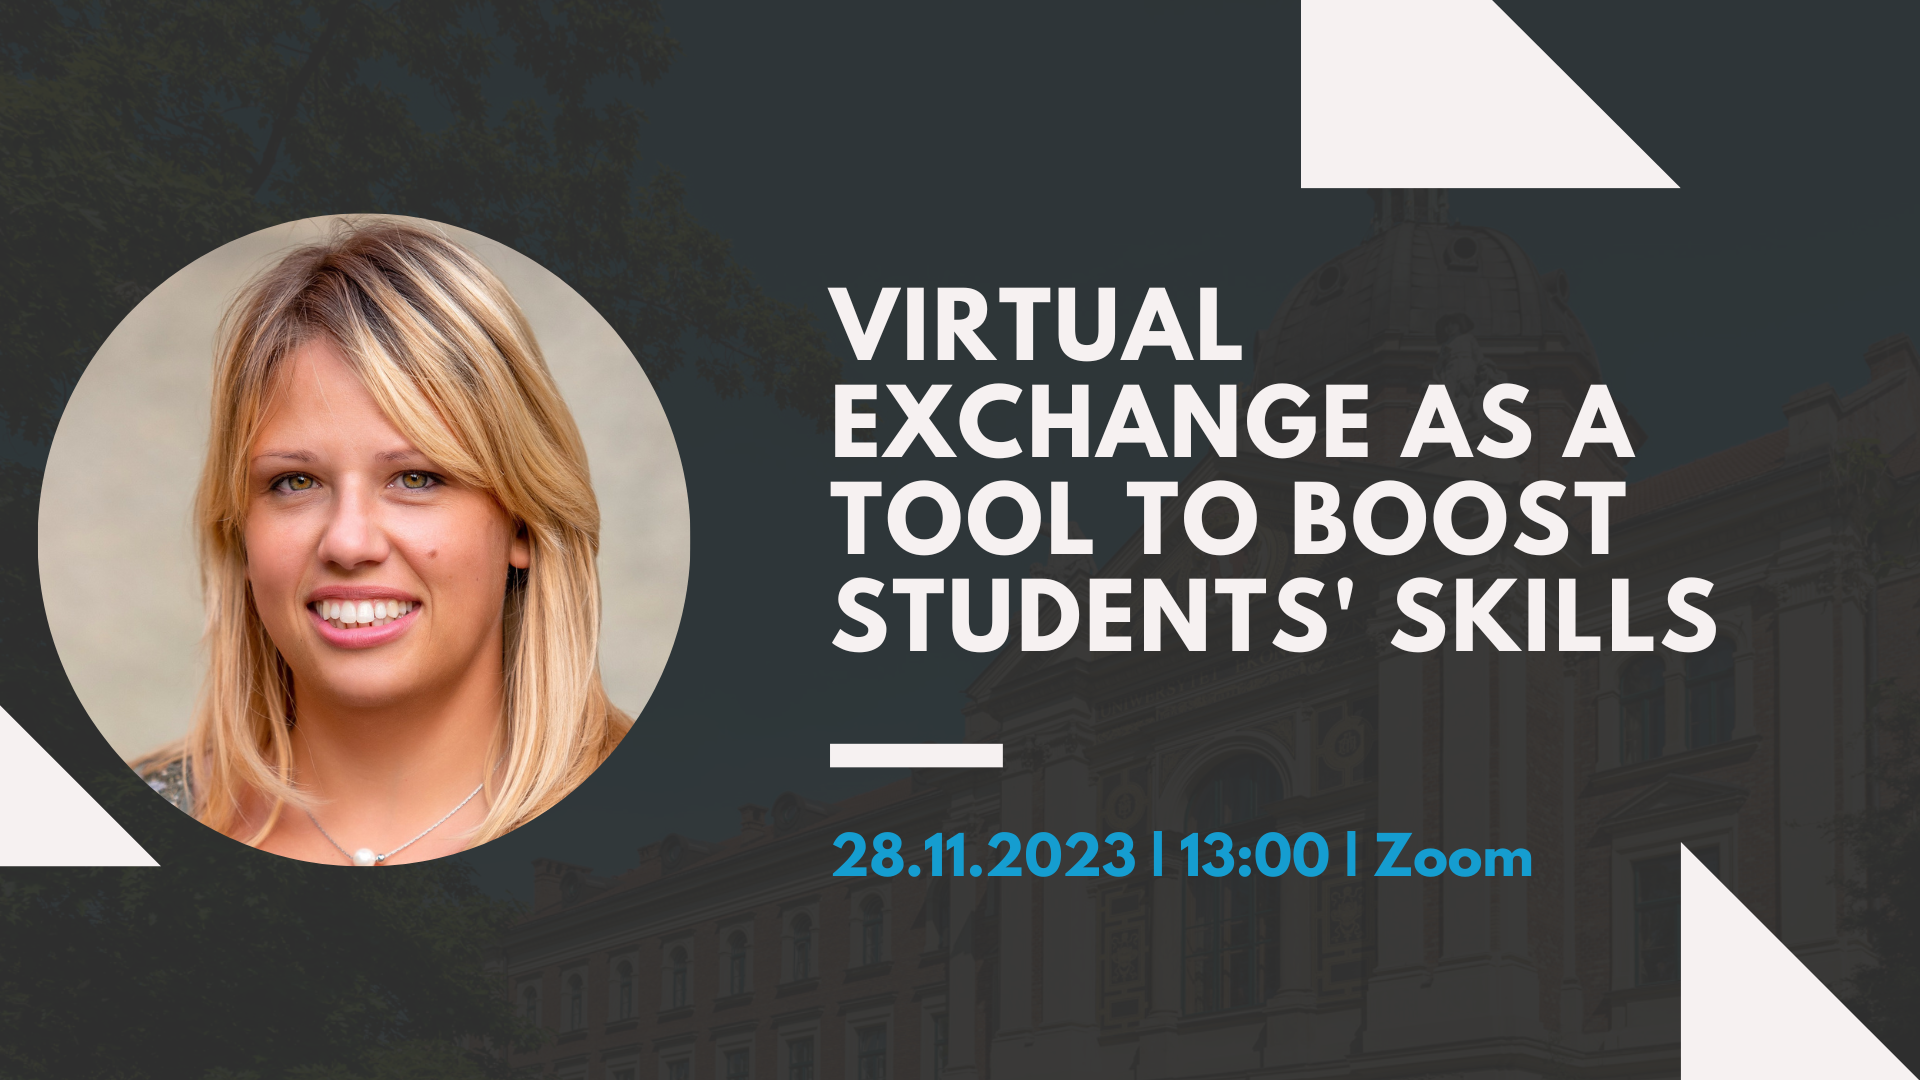 Virtual Exchange as a tool to boost students' skills